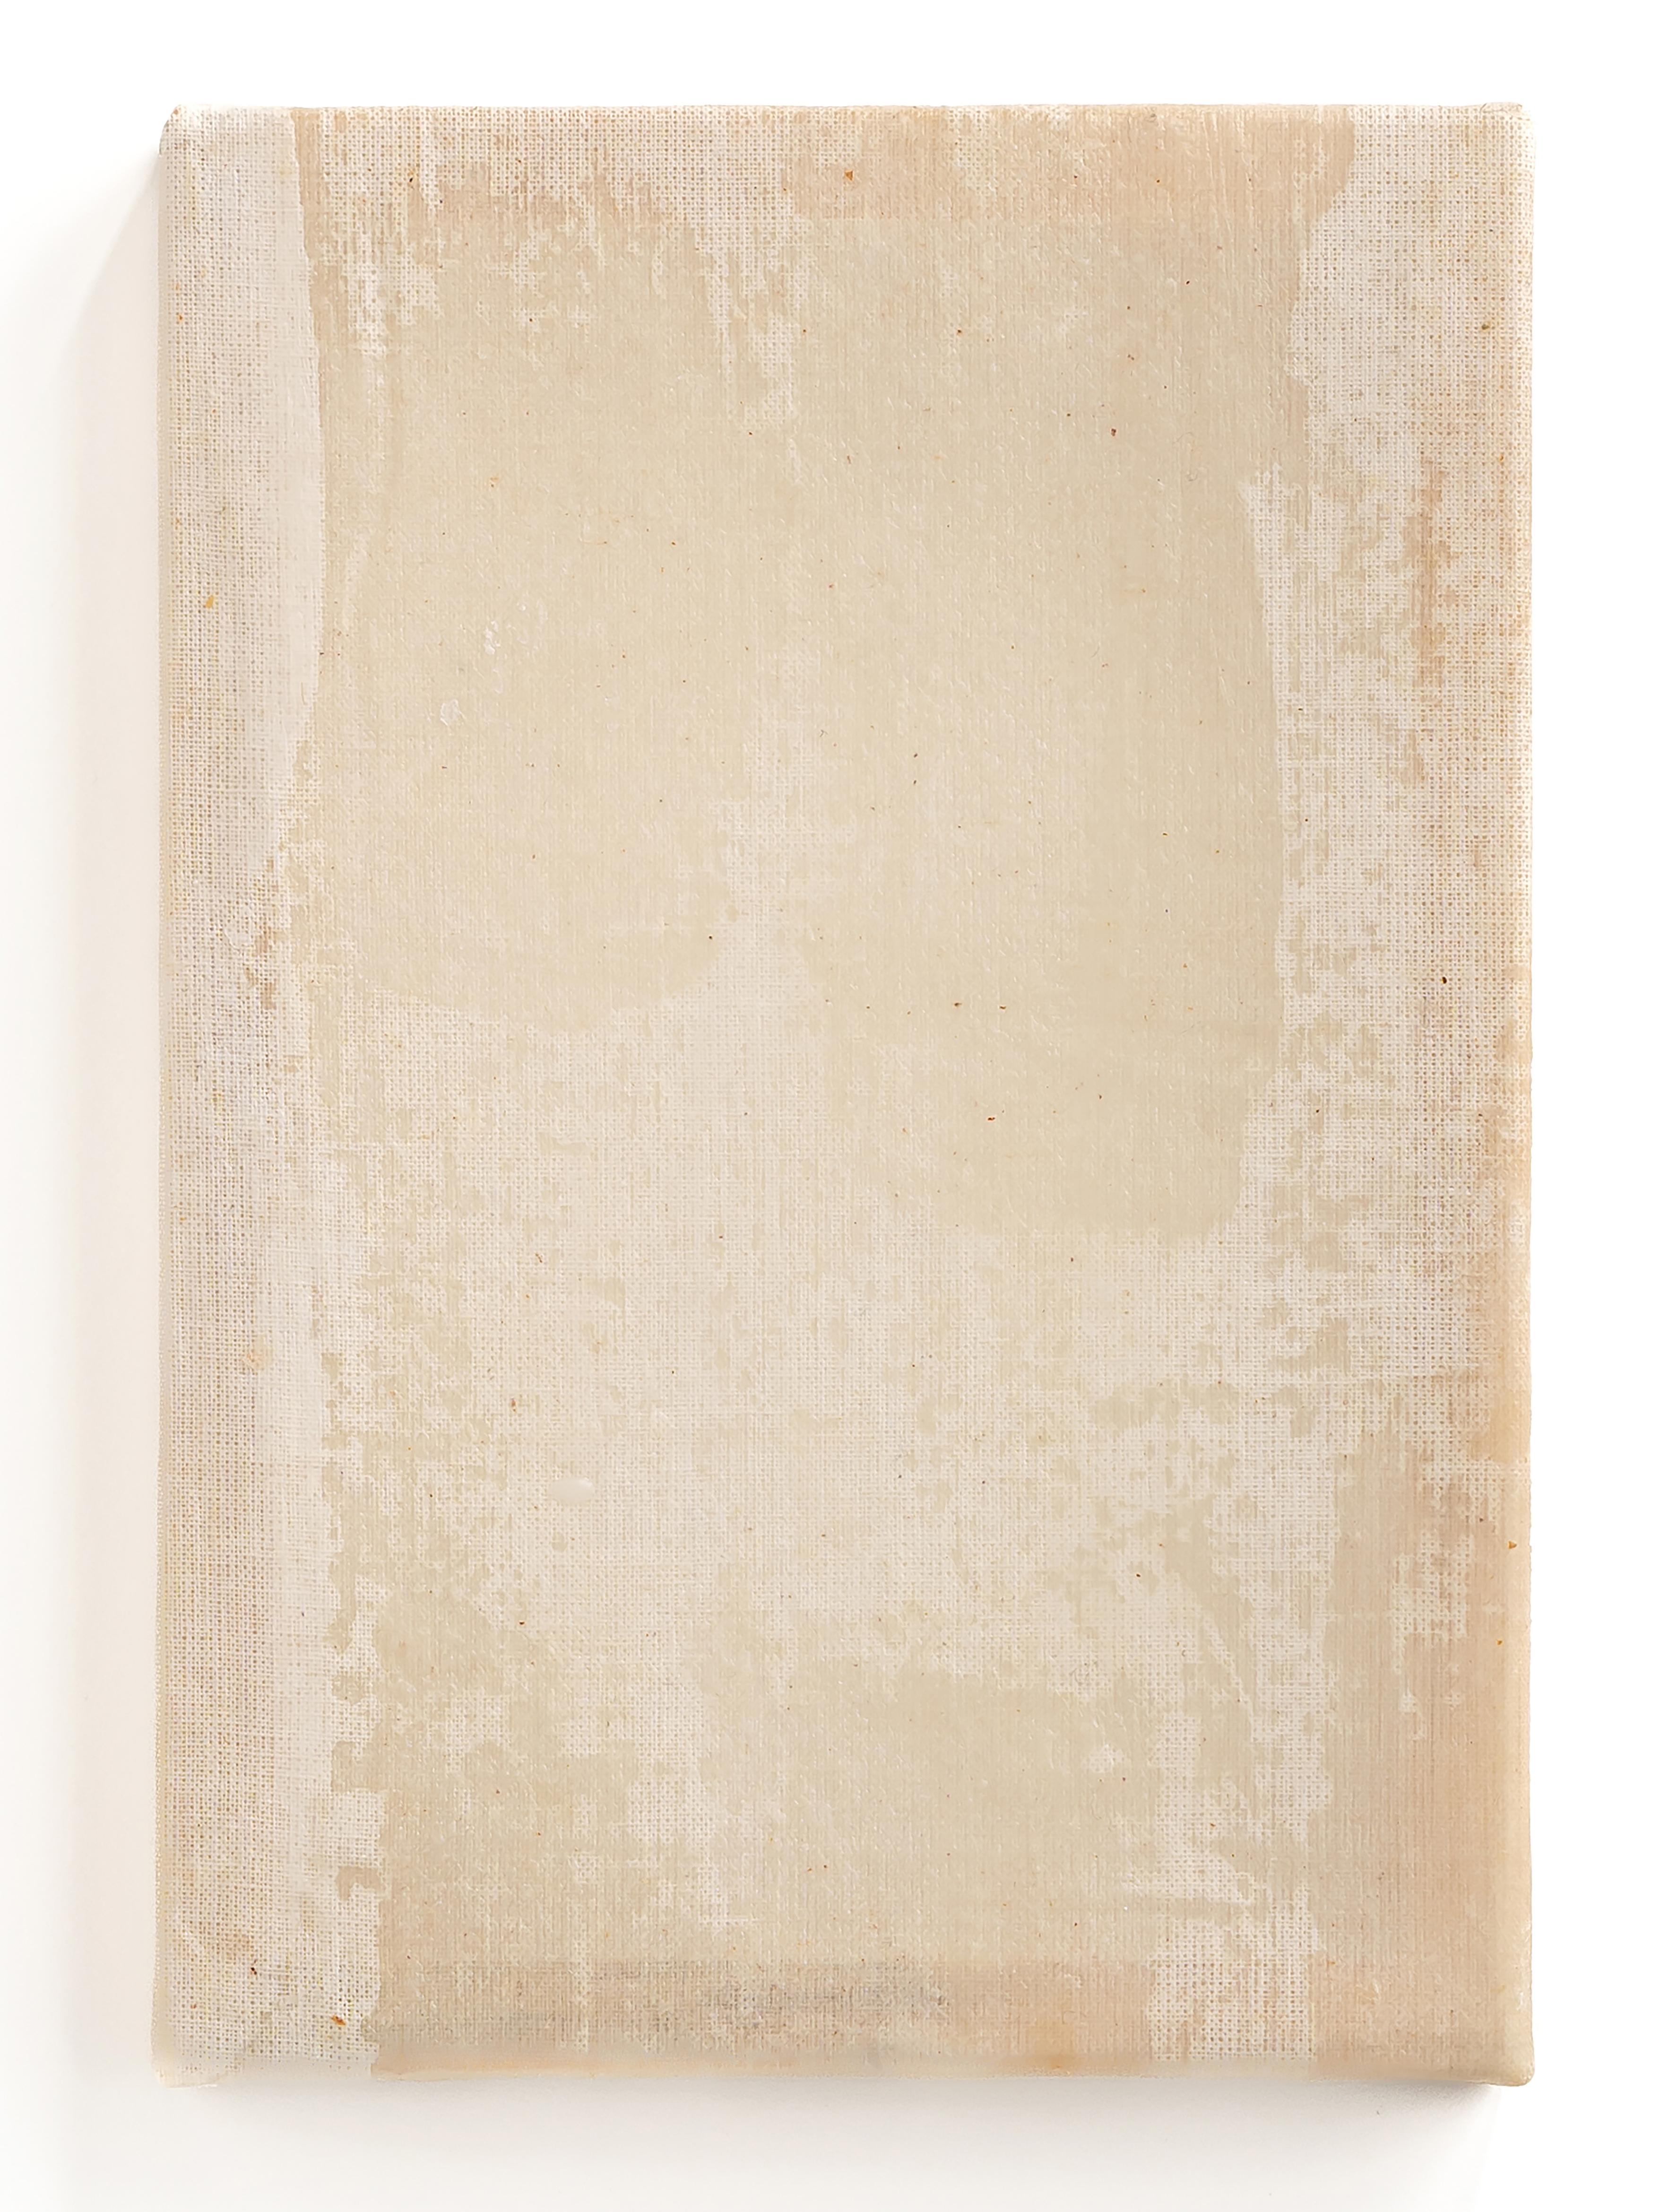 Cristina Loya Domingo Abstract Painting - UNTITLED 0.12 – wax on linen, natural materials, ecologies, minimal/abstract scr